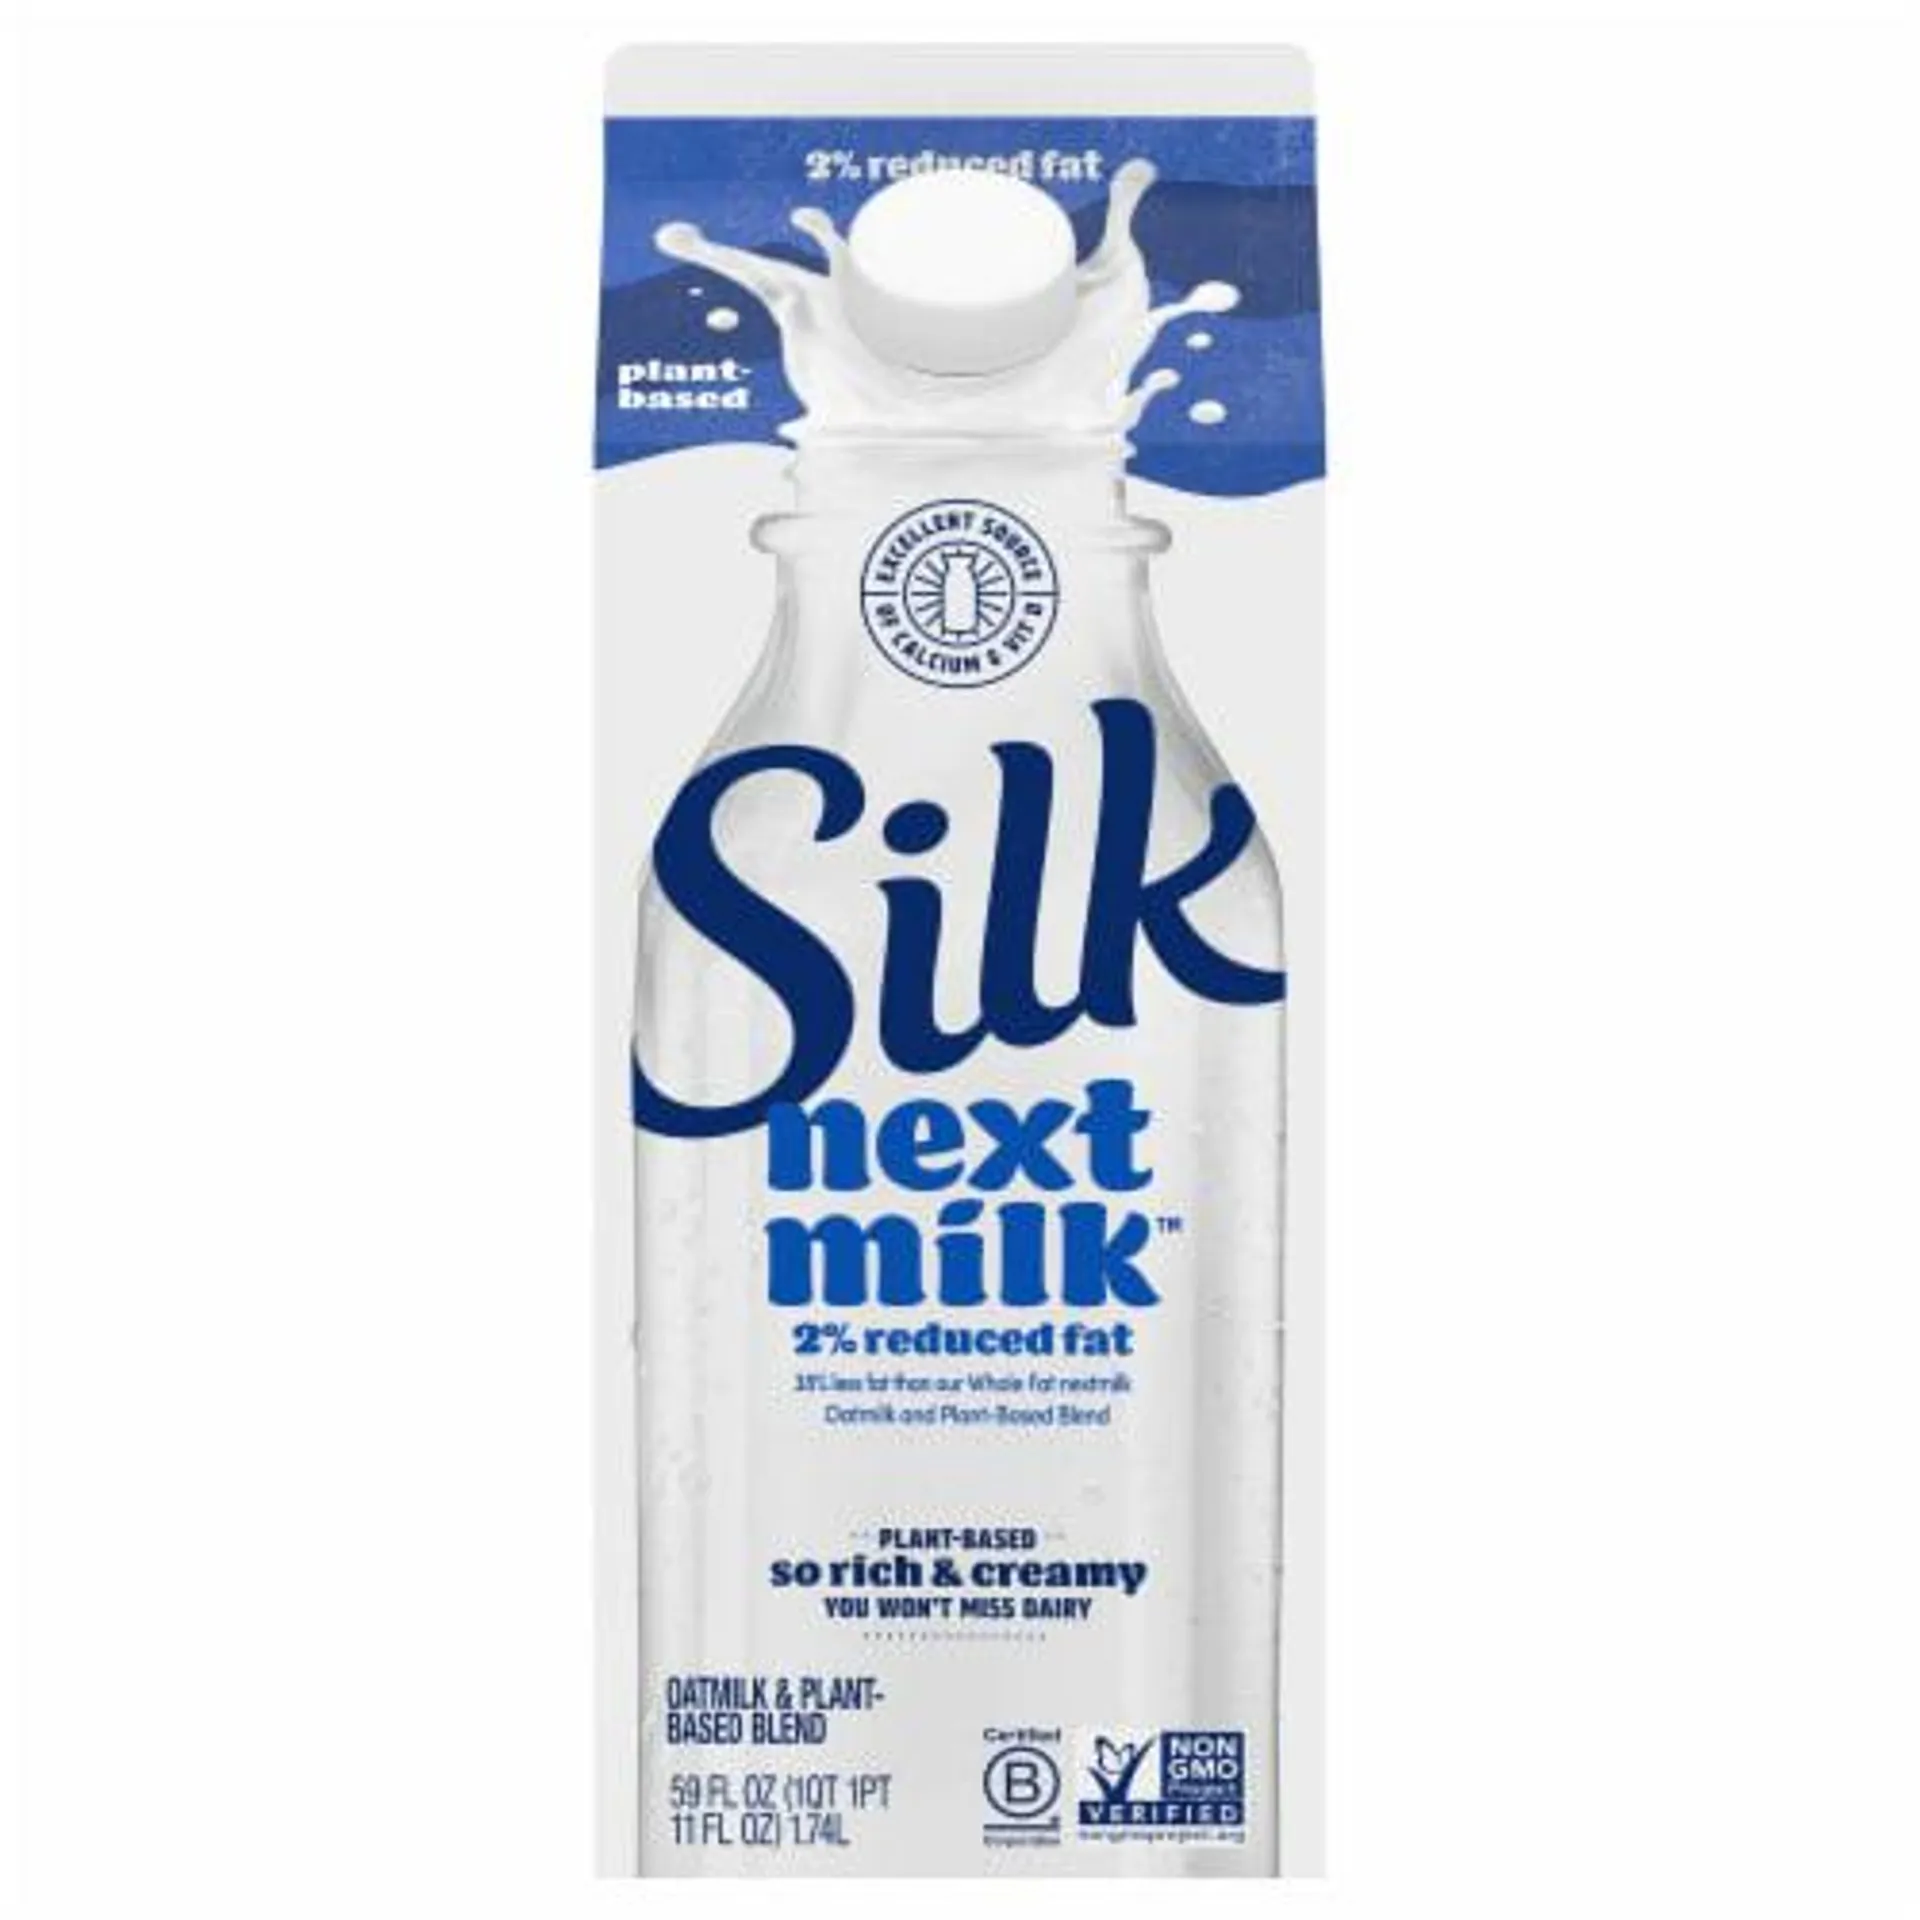 Silk Next Milk™ 2% Reduced Fat Oatmilk and Plant-Based Blend